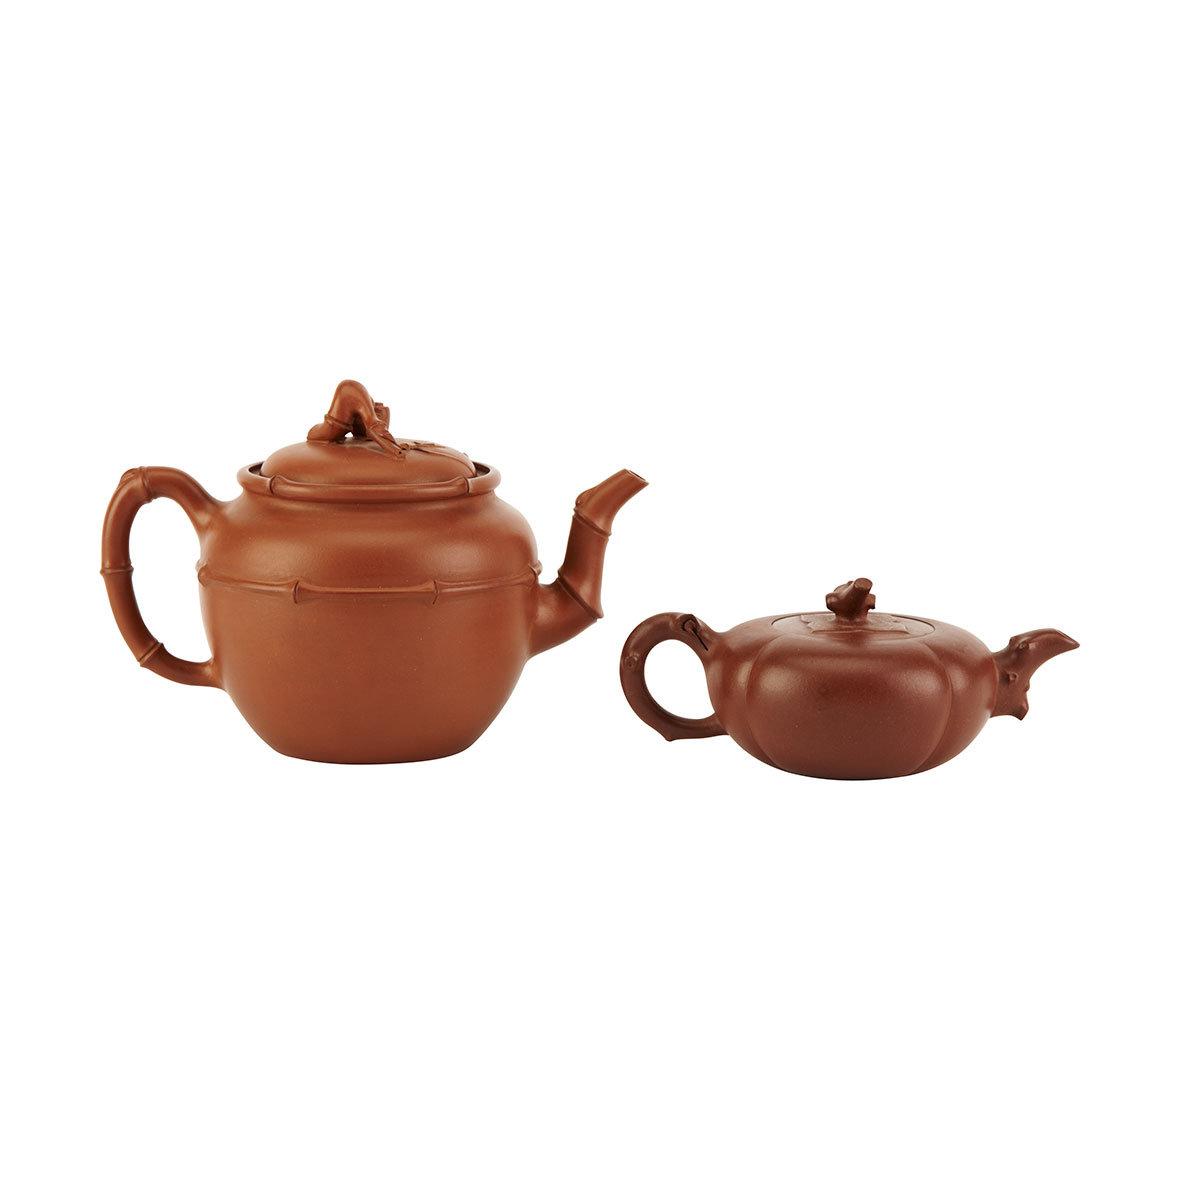 Two Yixing Teapots The first 176c9b